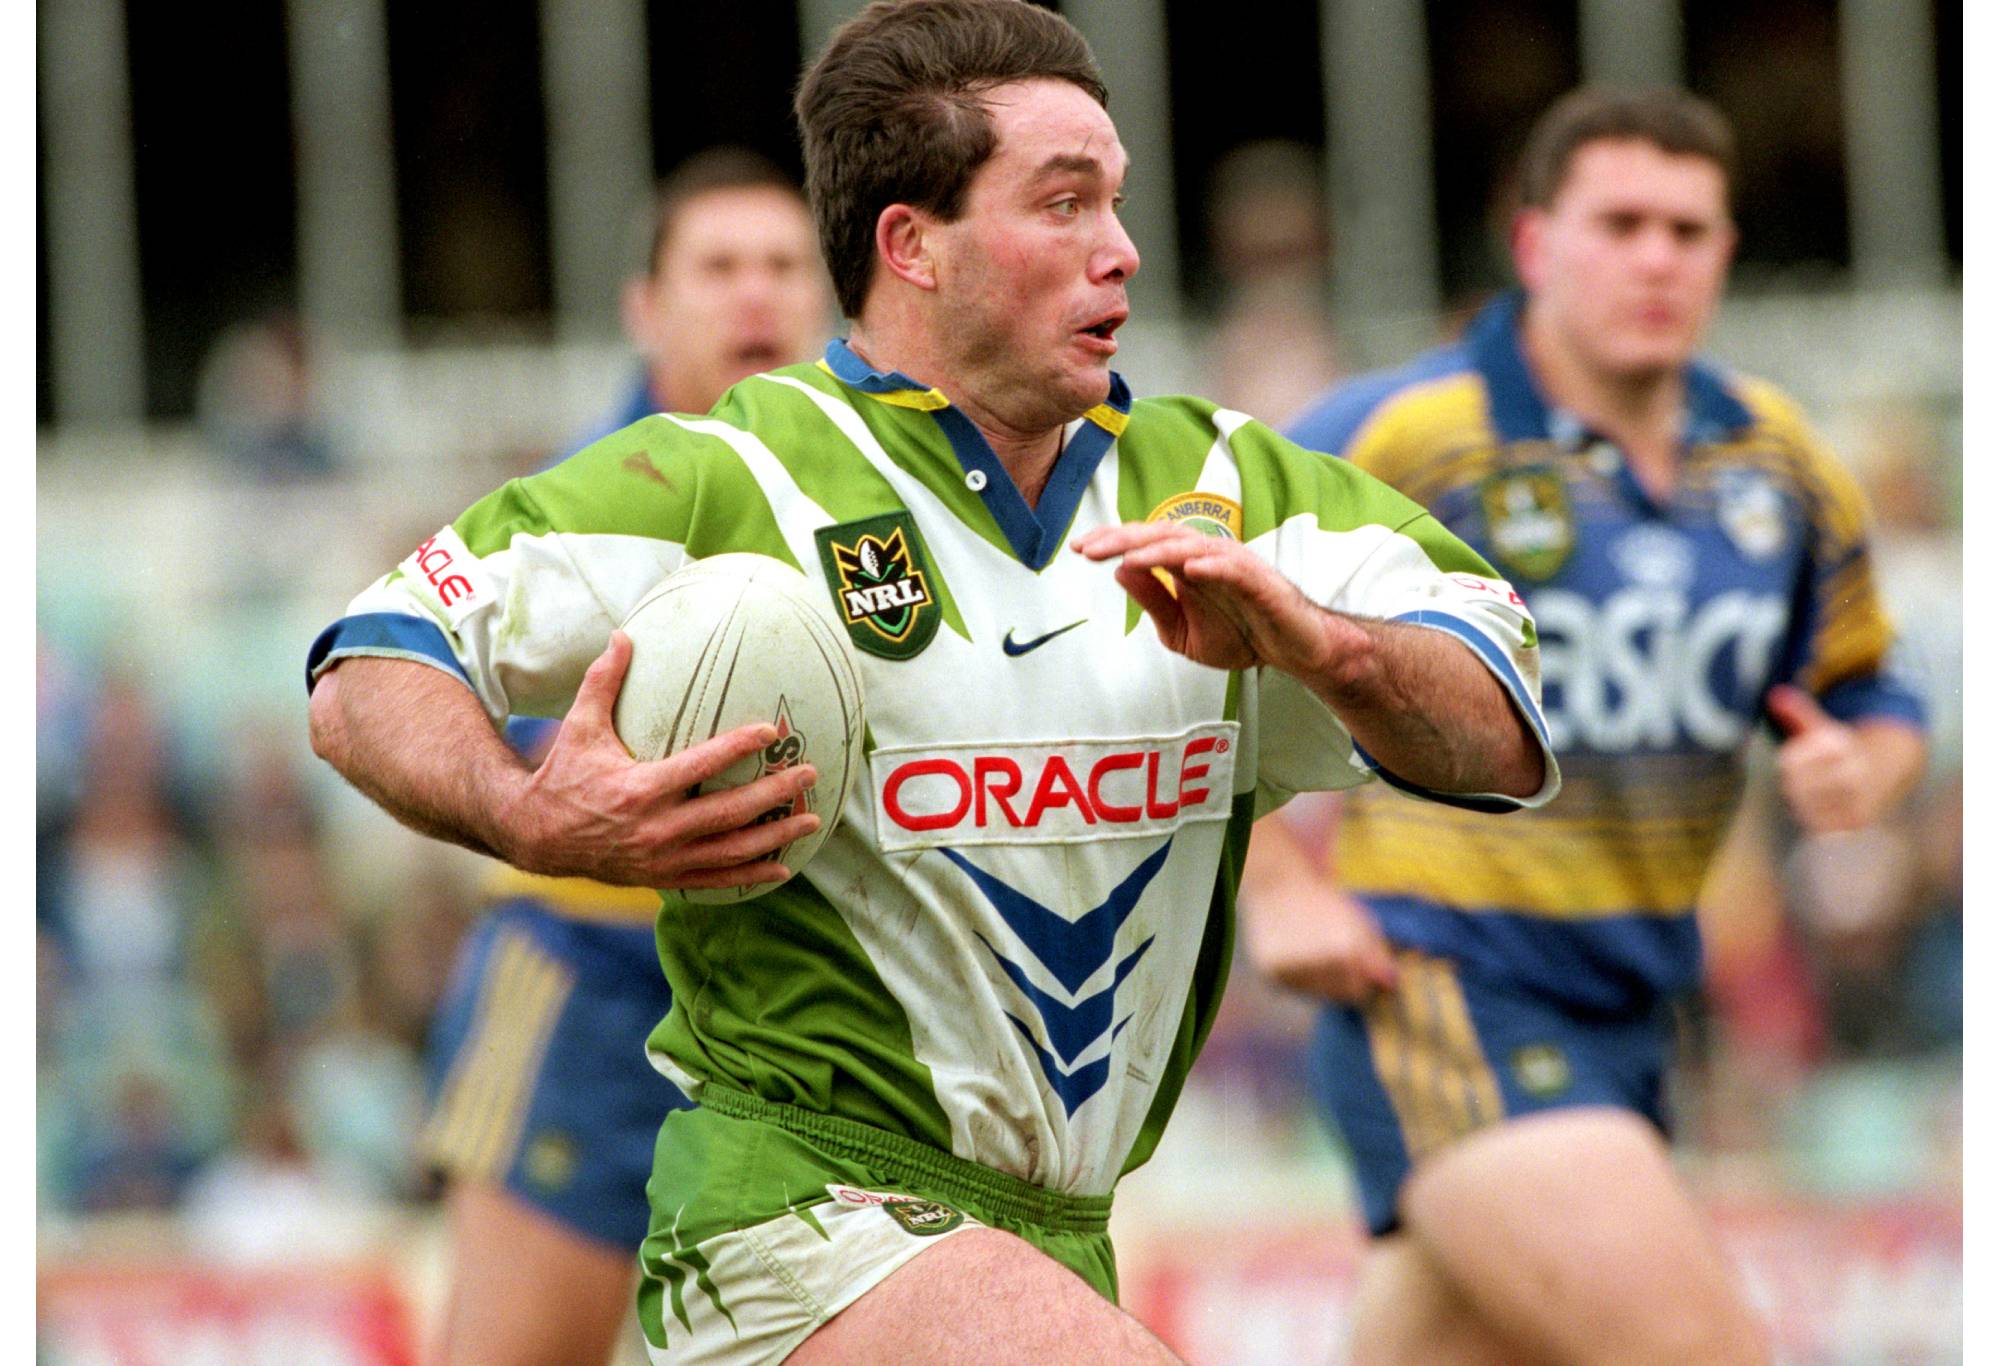 SYDNEY, AUSTRALIA - 1998:  Bradley Clyde of the Raiders makes a break during a NRL match between the Parramatta Eels and the Canberra Raiders at Parramatta Stadium 1998, in Sydney, Australia. (Photo by Adam Pretty/Getty Images)